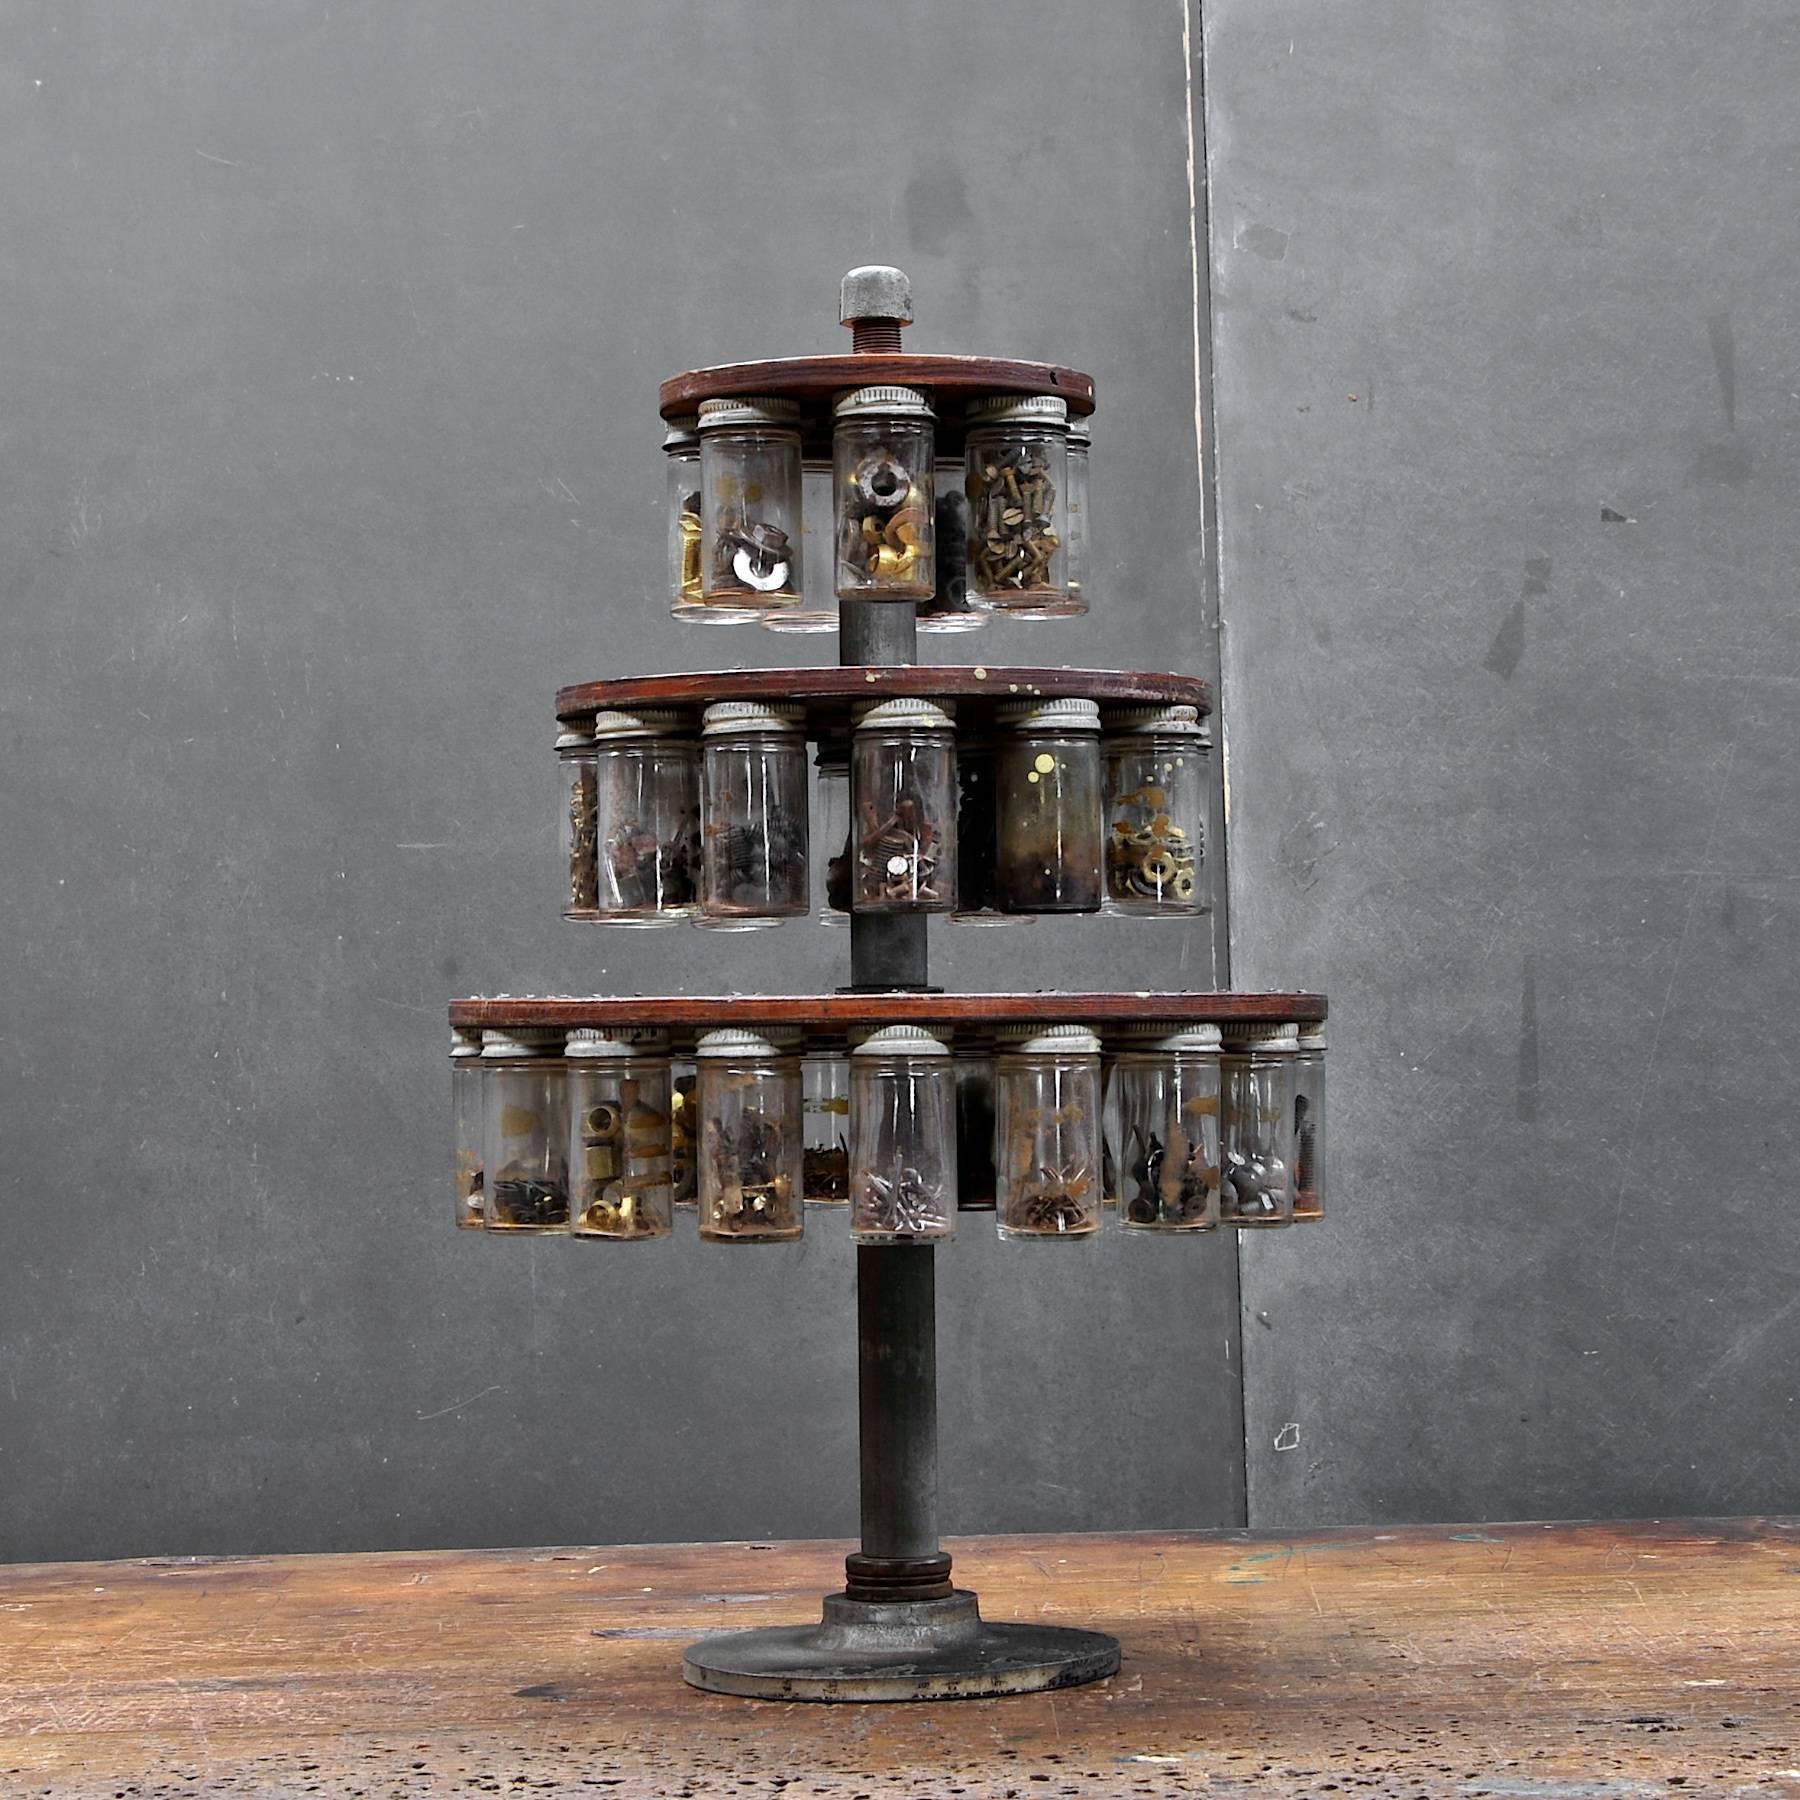 Interesting and overbuilt functional work shop hardware tree. Please Specify if you want the Hardware in Jars, or all jars can be emptied and cleaned upon order.